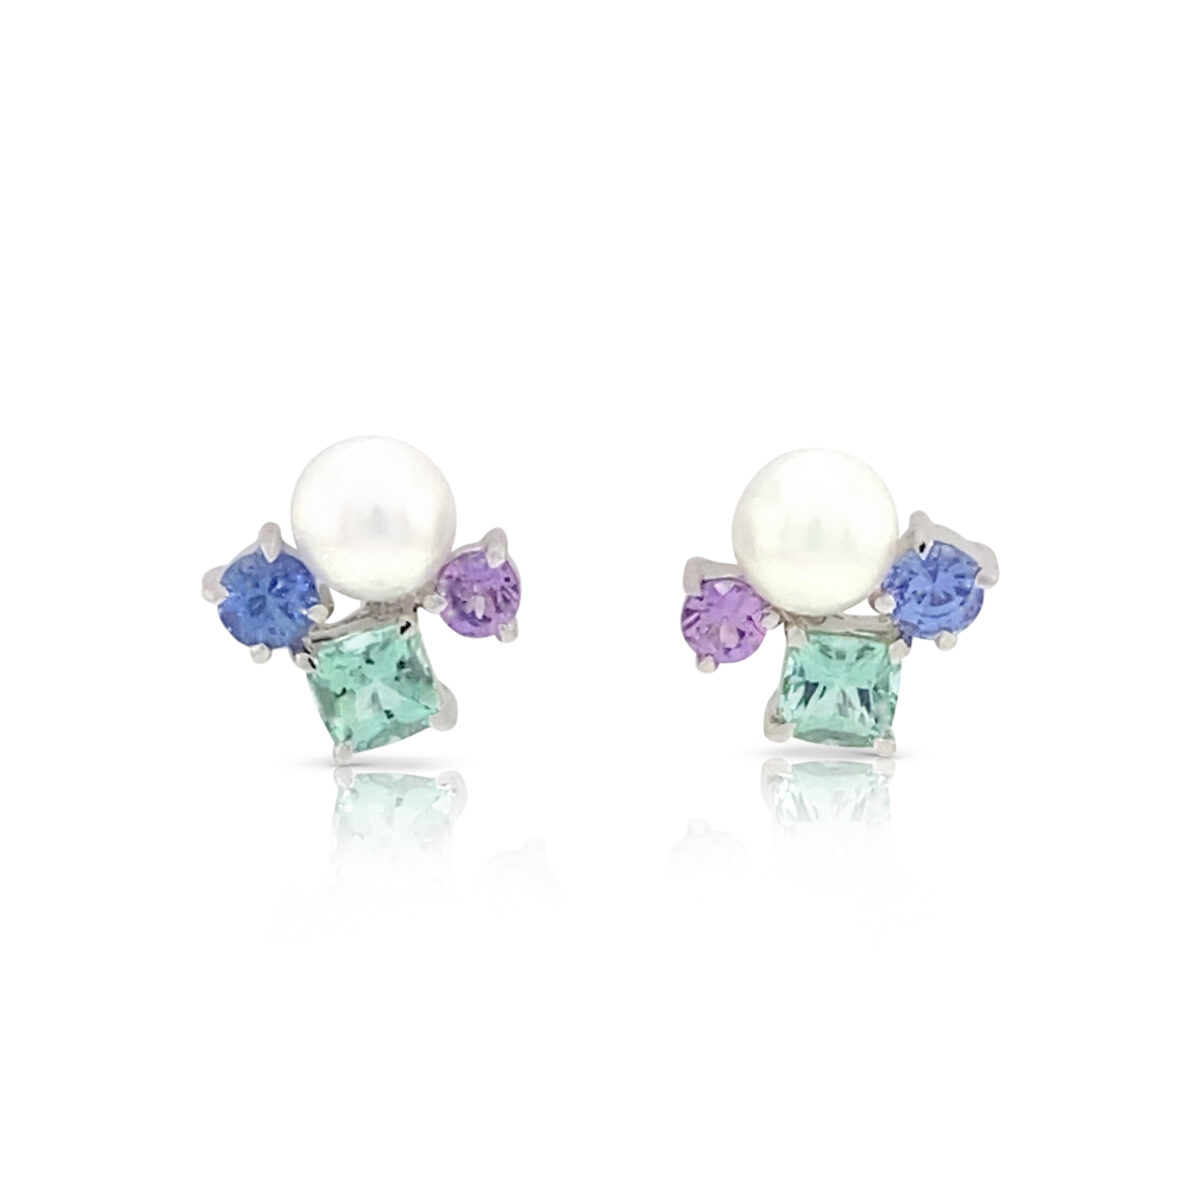 Scintilla earring in Seafood Tourmaline, Pink and Blue Sapphire and Pearl